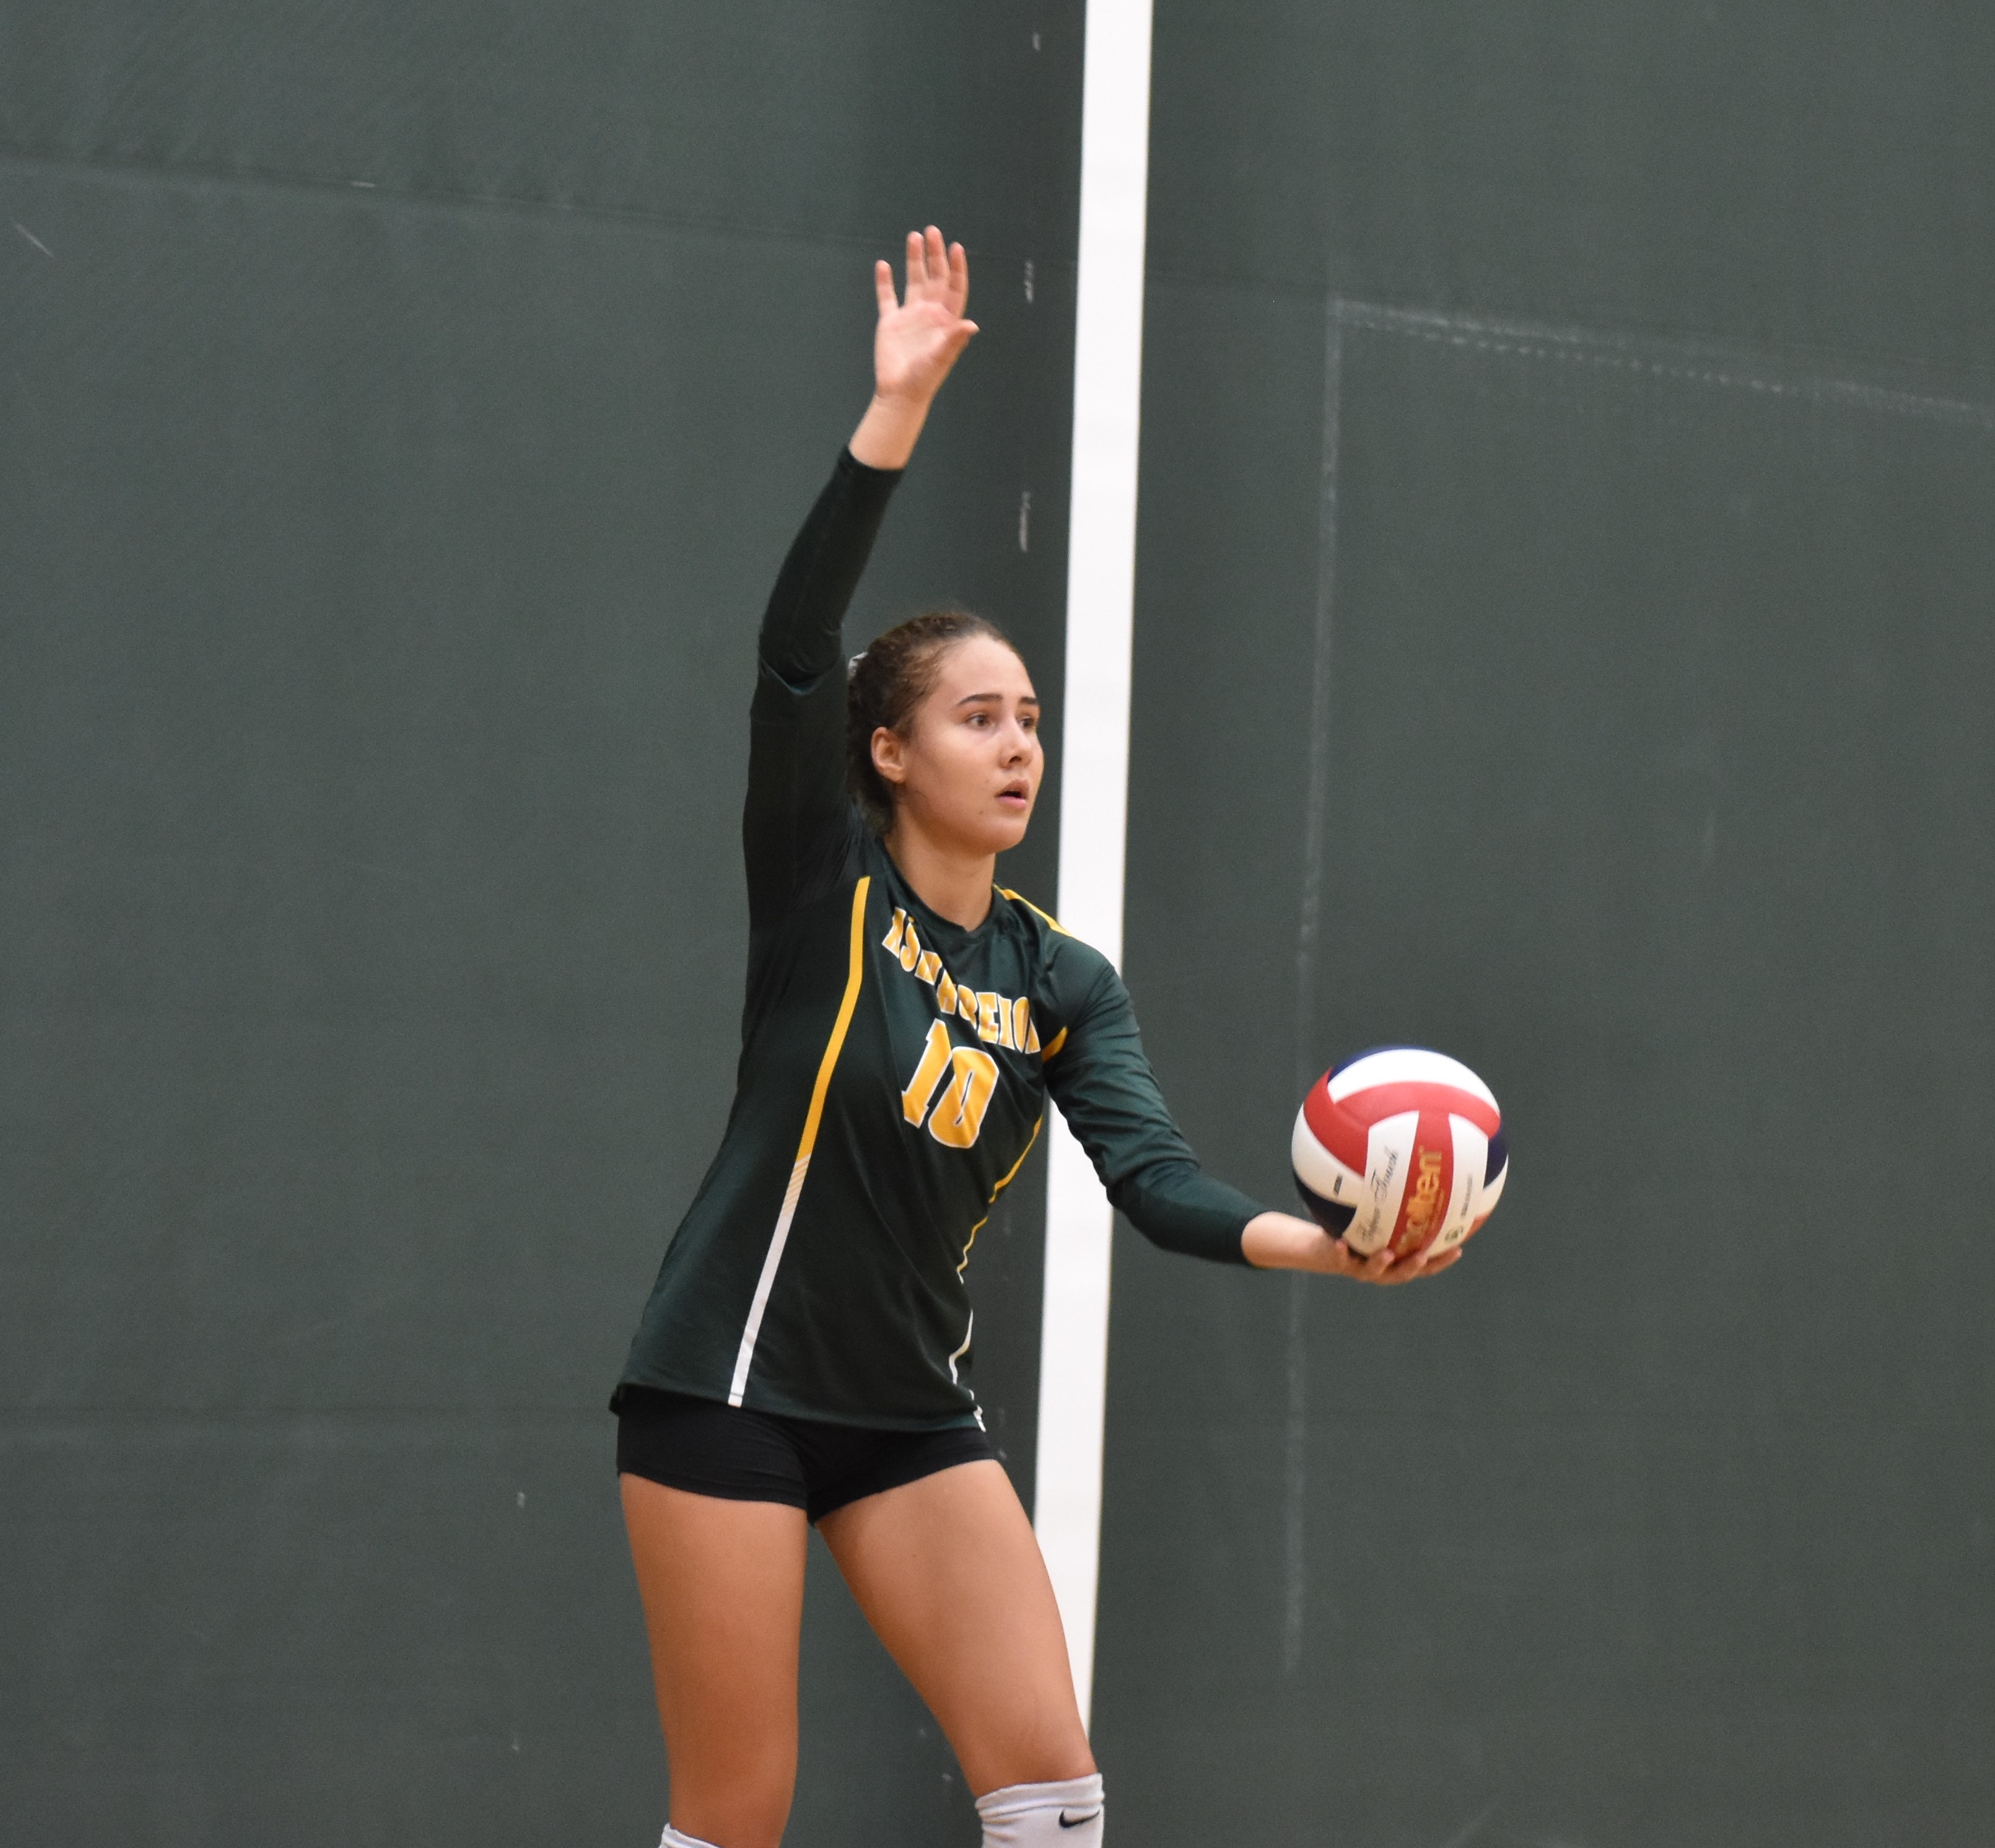 Jaguars volleyball team open up the season with a victory